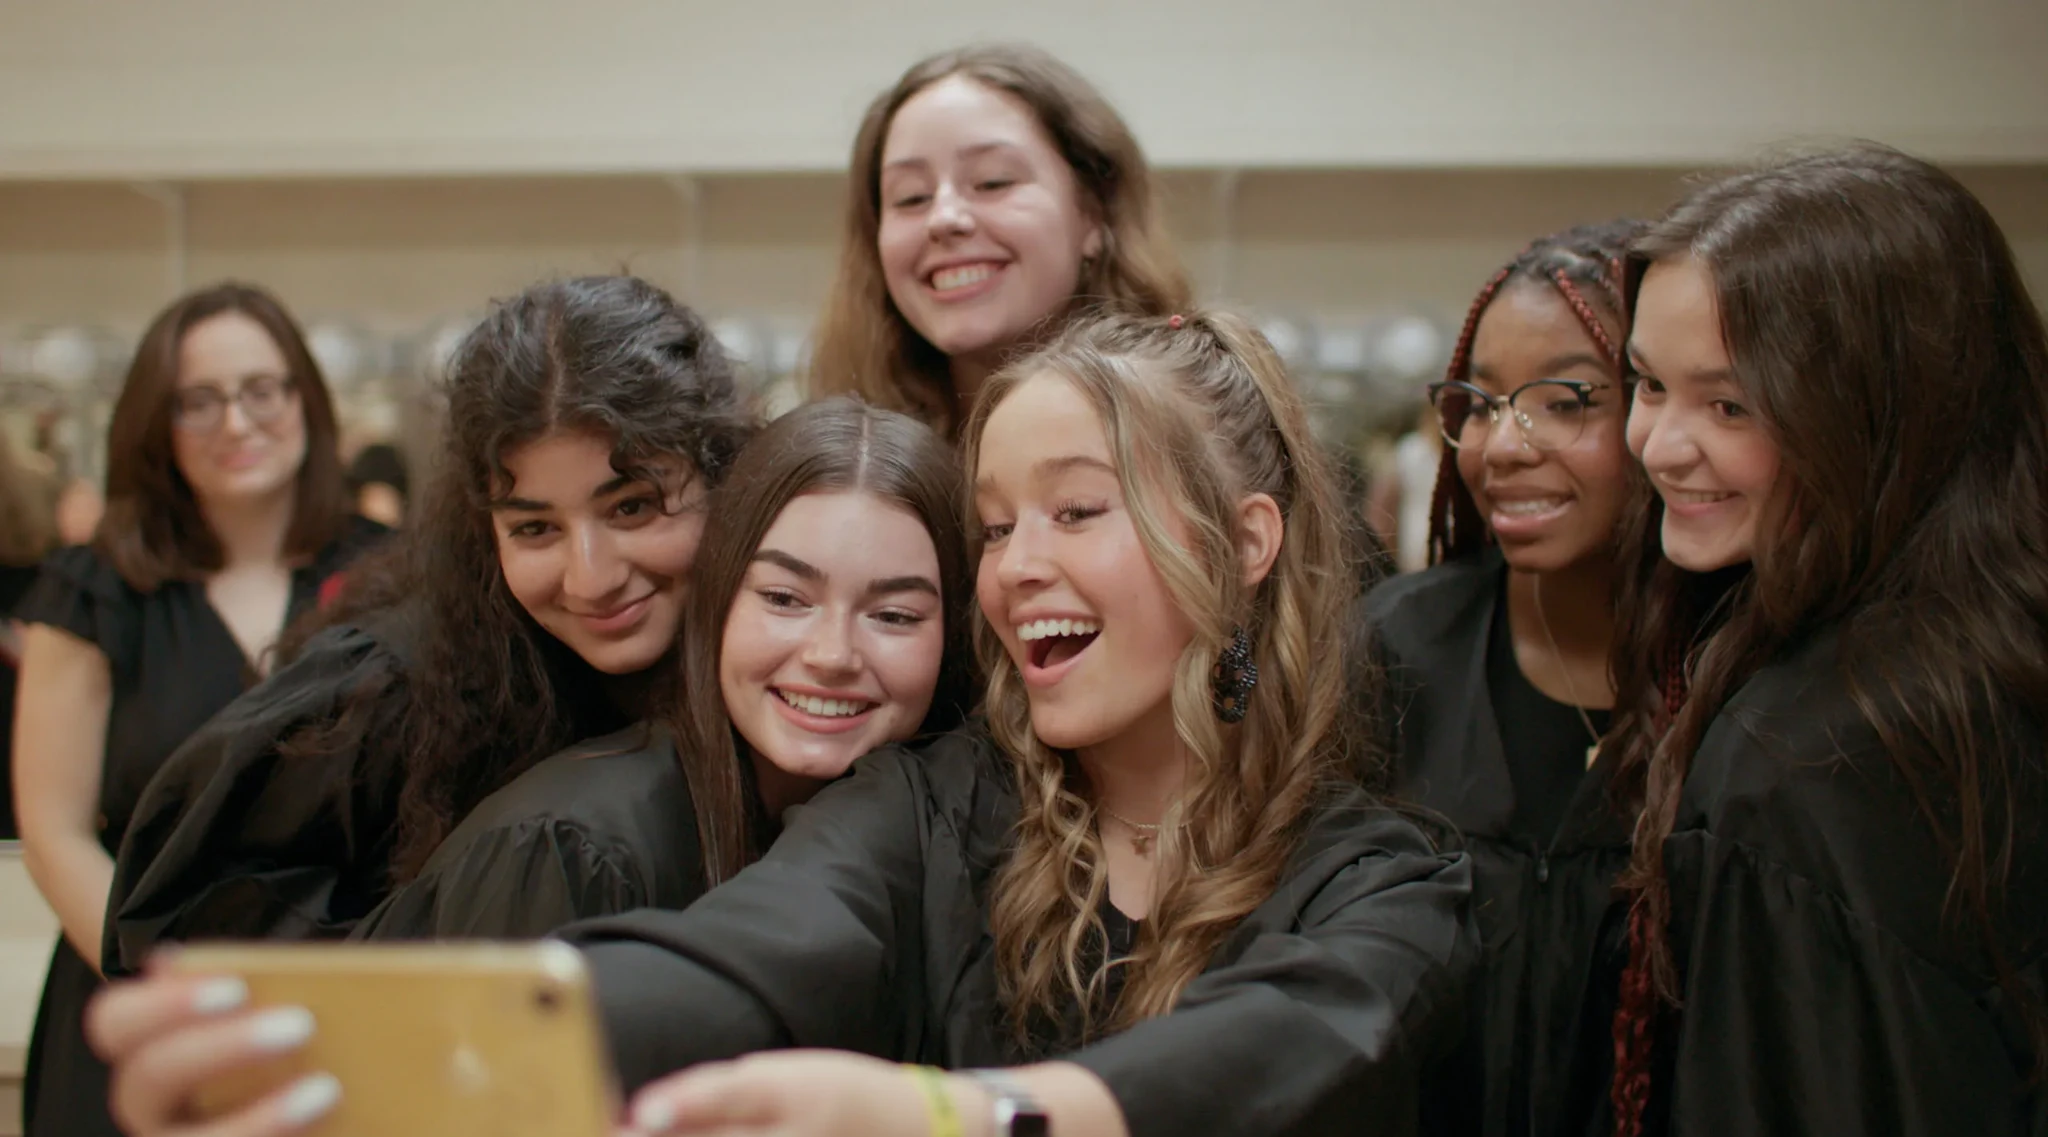 'What 17-Year-Old Girl Says That?': Behind the Scenes of the Documentary 'Girls State' (Exclusive)